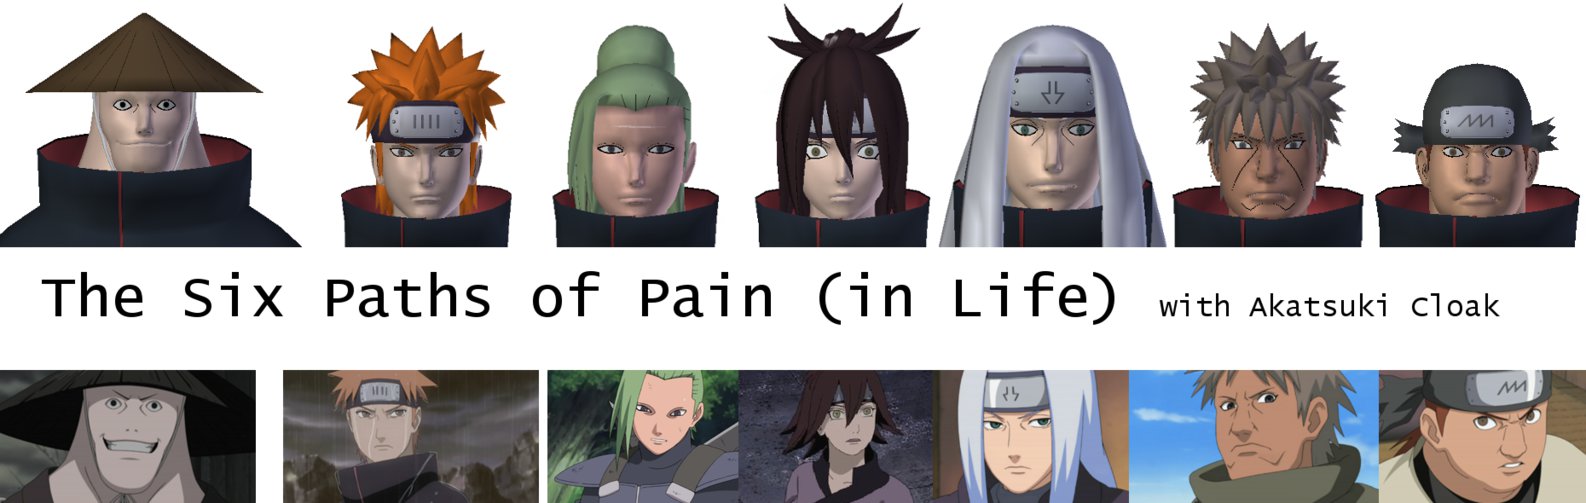 Six Paths of Pain in Life by ChakraWarrior2012 1586x503